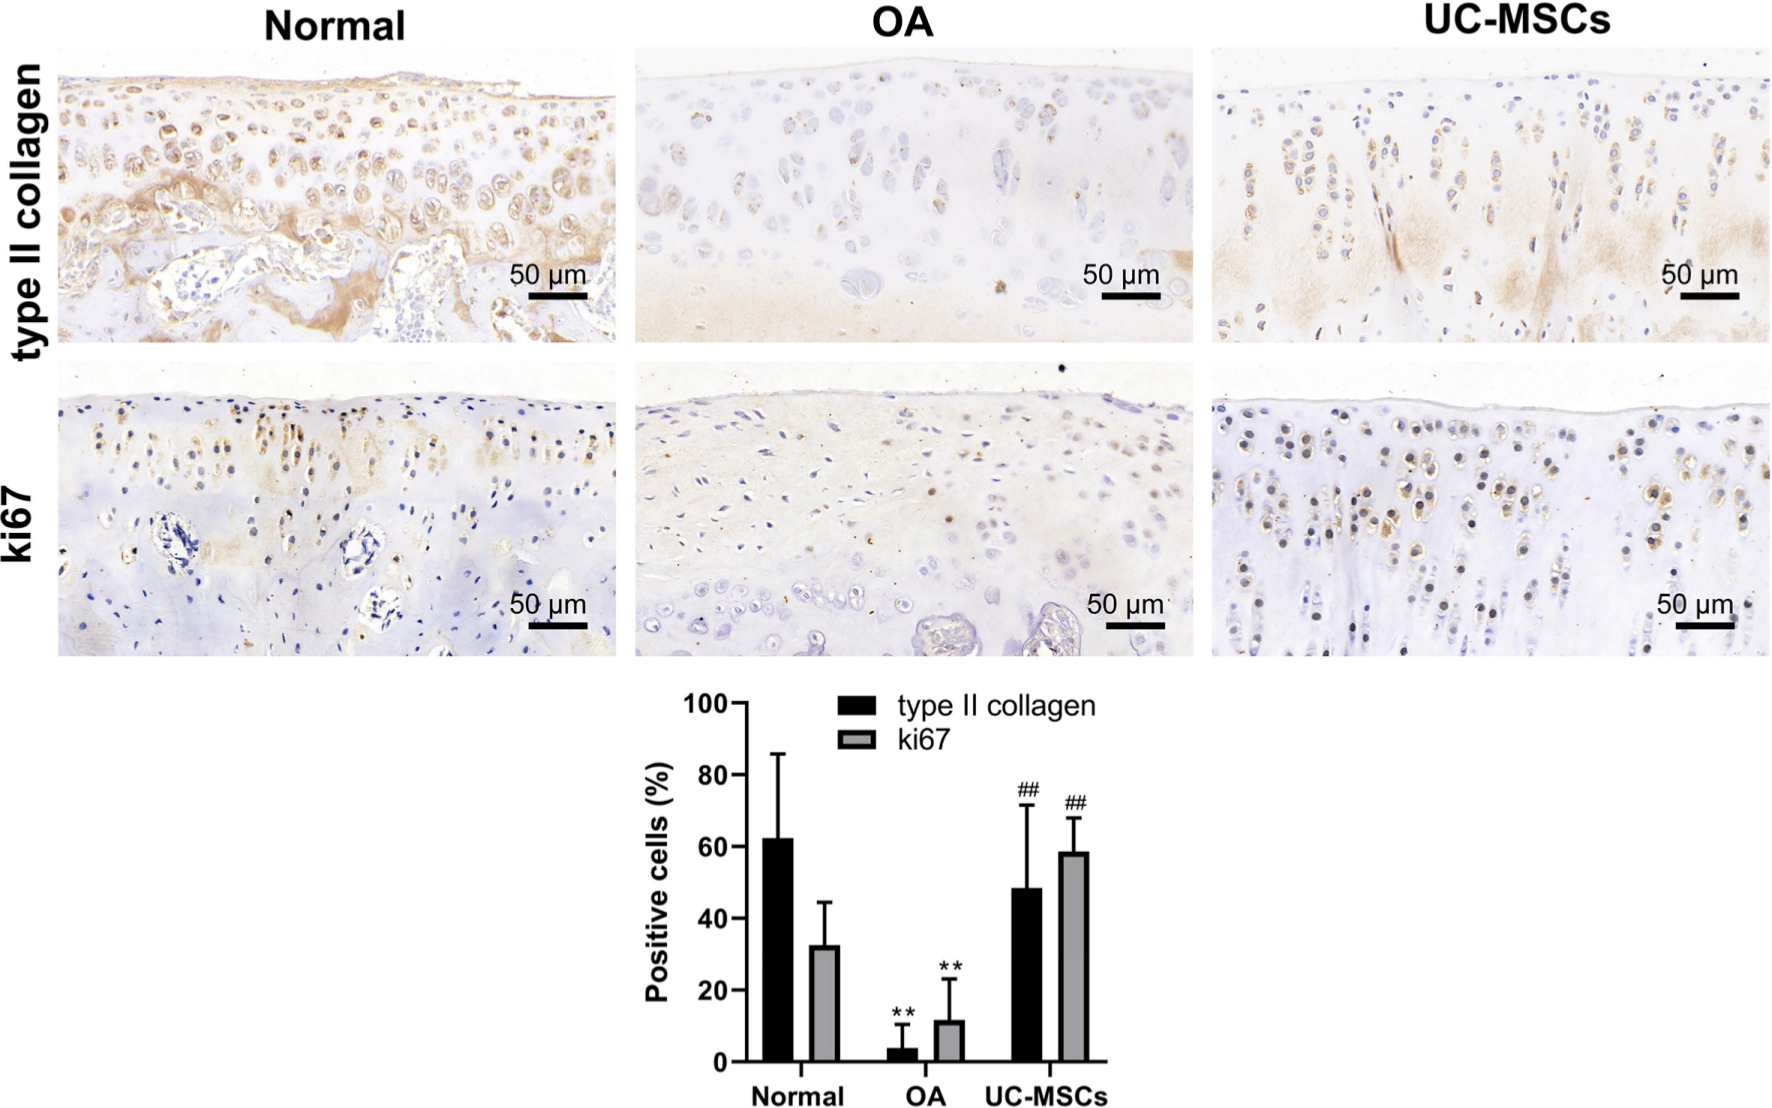 Fig. 5 
            Human umbilical cord mesenchymal stem cells (UC-MSCs) promoted matrix synthesis and chondrocyte proliferation in monosodium iodoacetate (MIA)-induced osteoarthritis (OA) cartilage. The articular cartilage was immunostained for the expression of collagen II and ki67. The percentage of positive cells (in brown colour) for both collagen II and ki67 was calculated, respectively. Data shown are mean and standard deviation from three rats/group. **p < 0.01 versus normal group, ##p < 0.01 versus UC-MSC-treated groups.
          